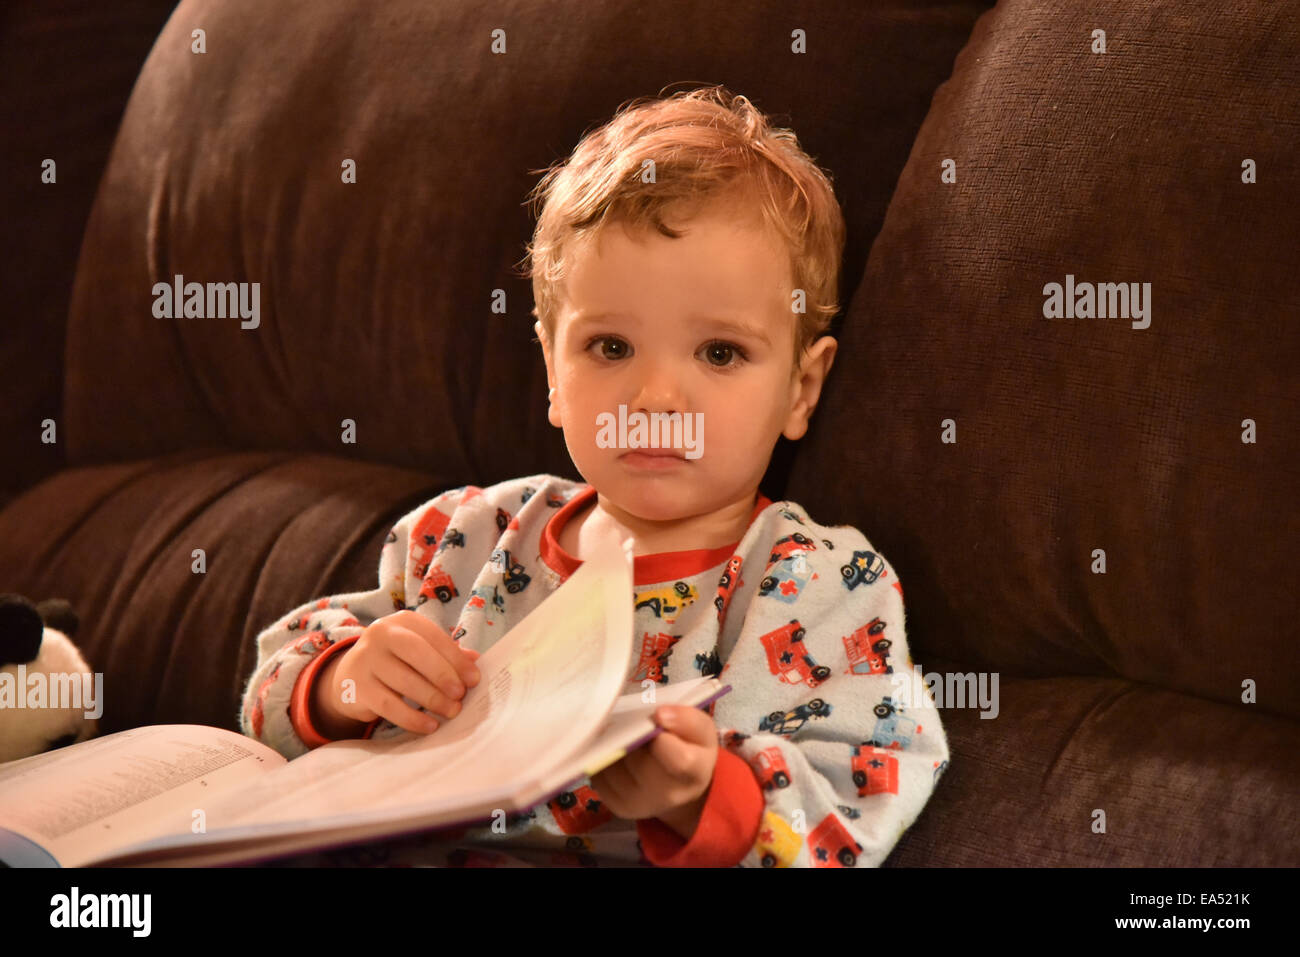 A young boy (two and a half years old) in pyjamas sat on a sofa reading a book just before bedtime Stock Photo